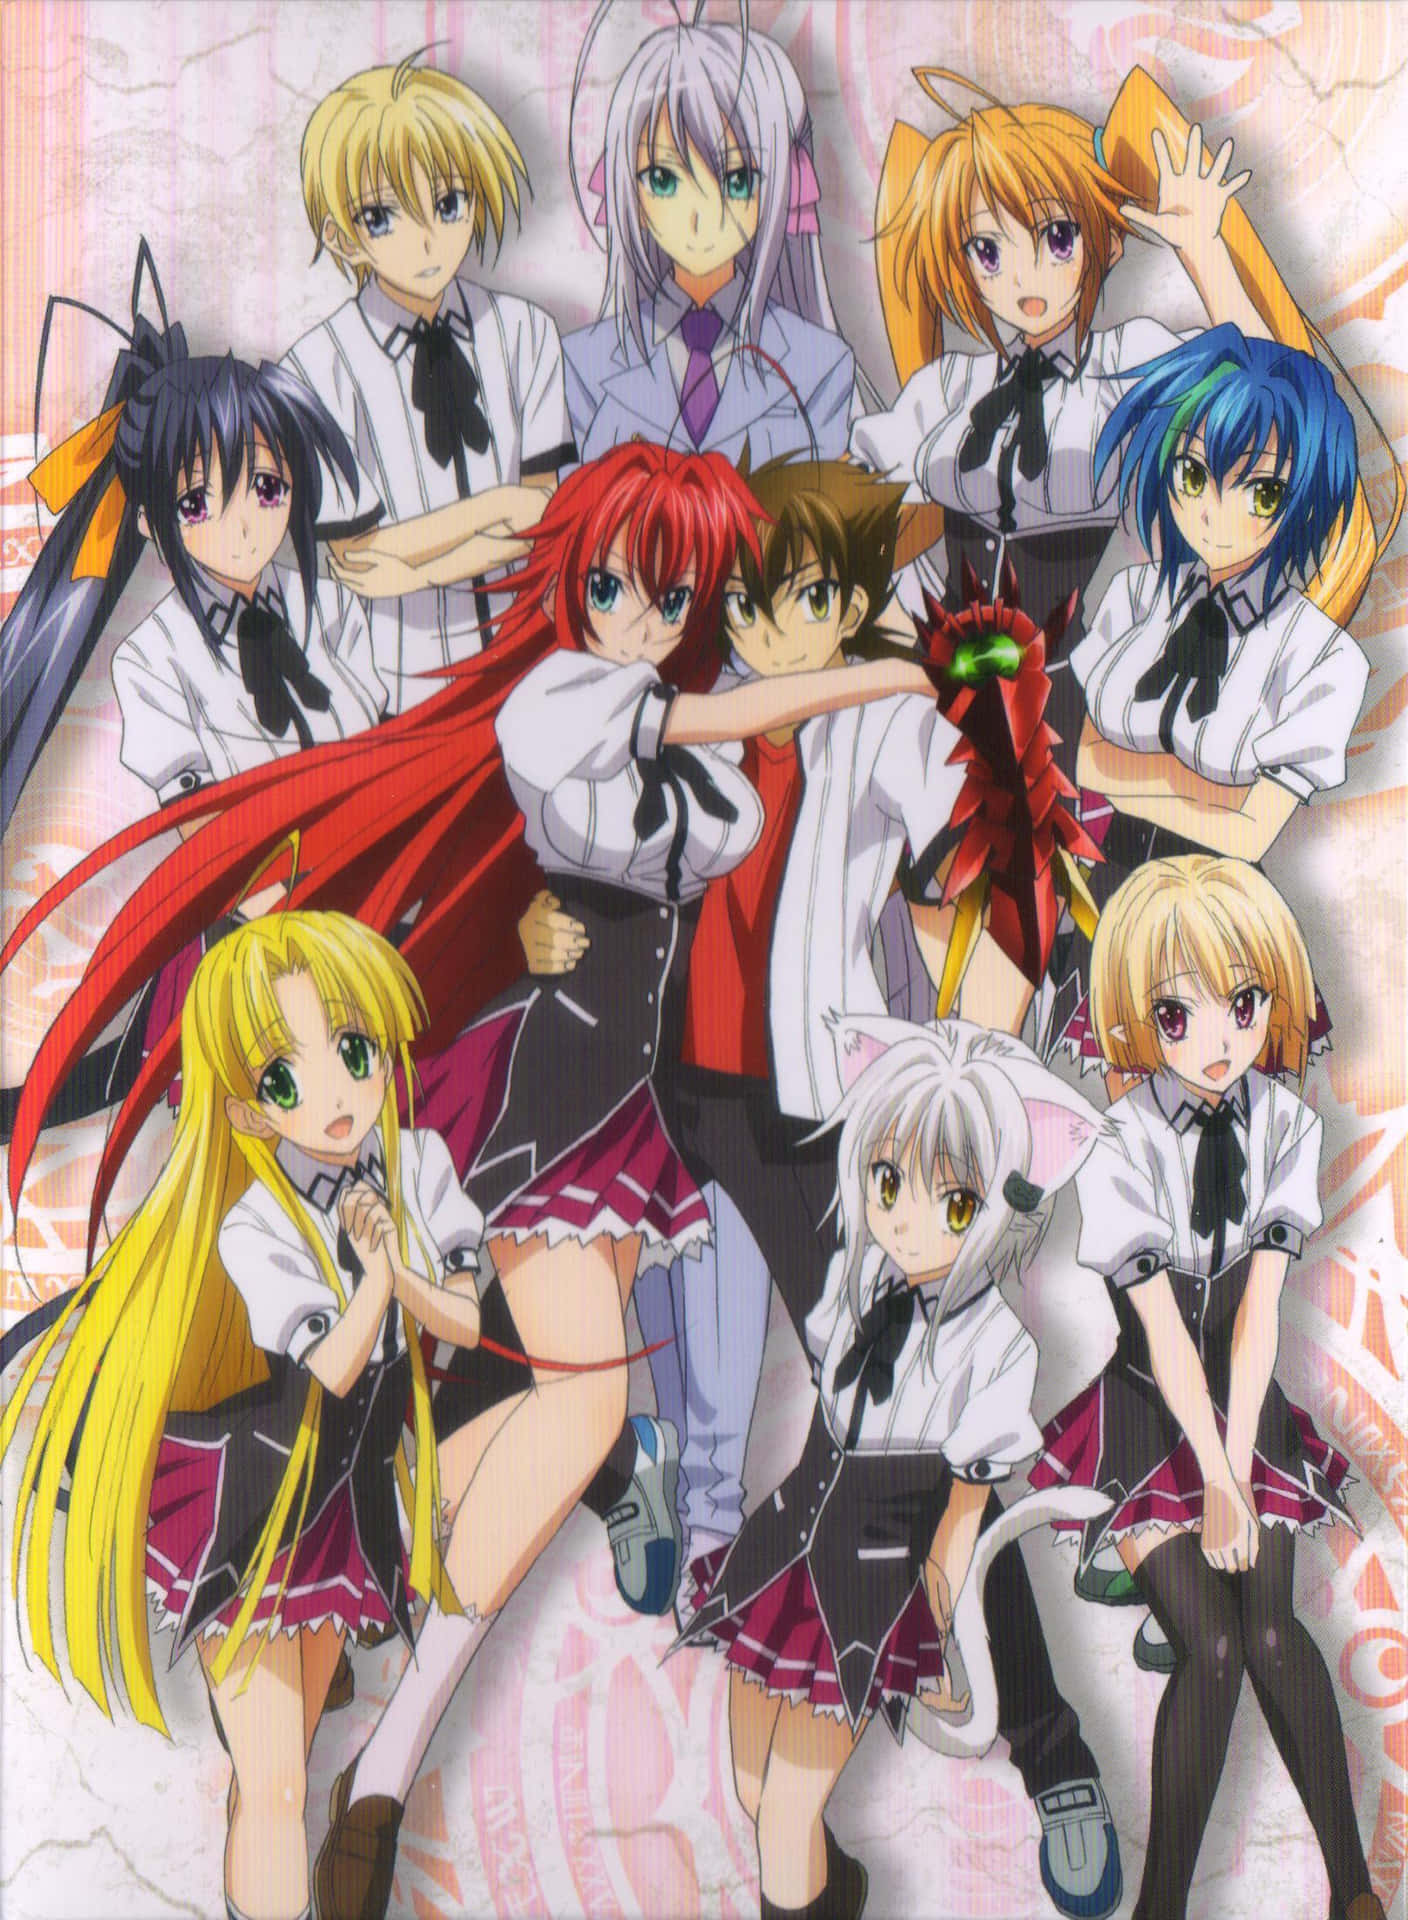 Download Join Issei Hyodo in his wild Highschool Dxd adventure